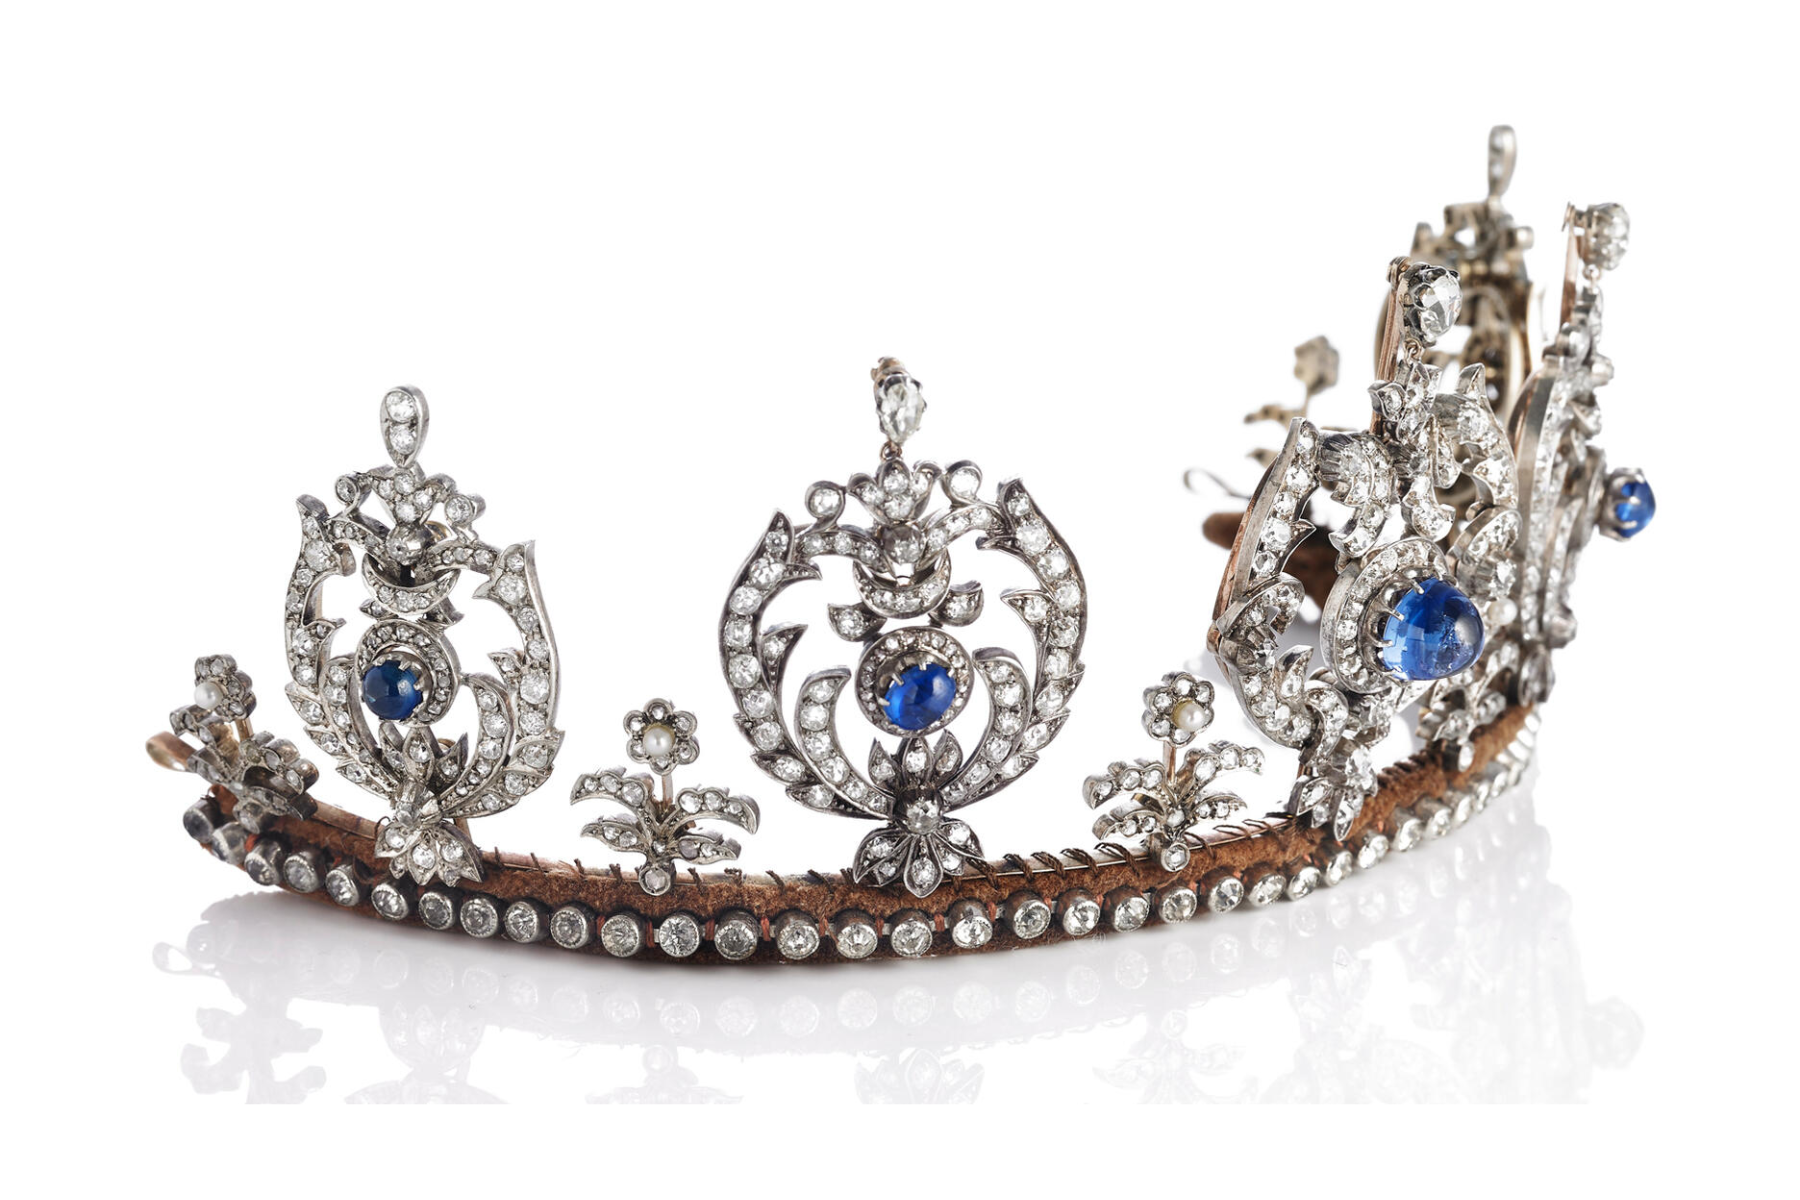 This Sapphire Tiara Once Owned By A Danish Princess Is Going To Auction